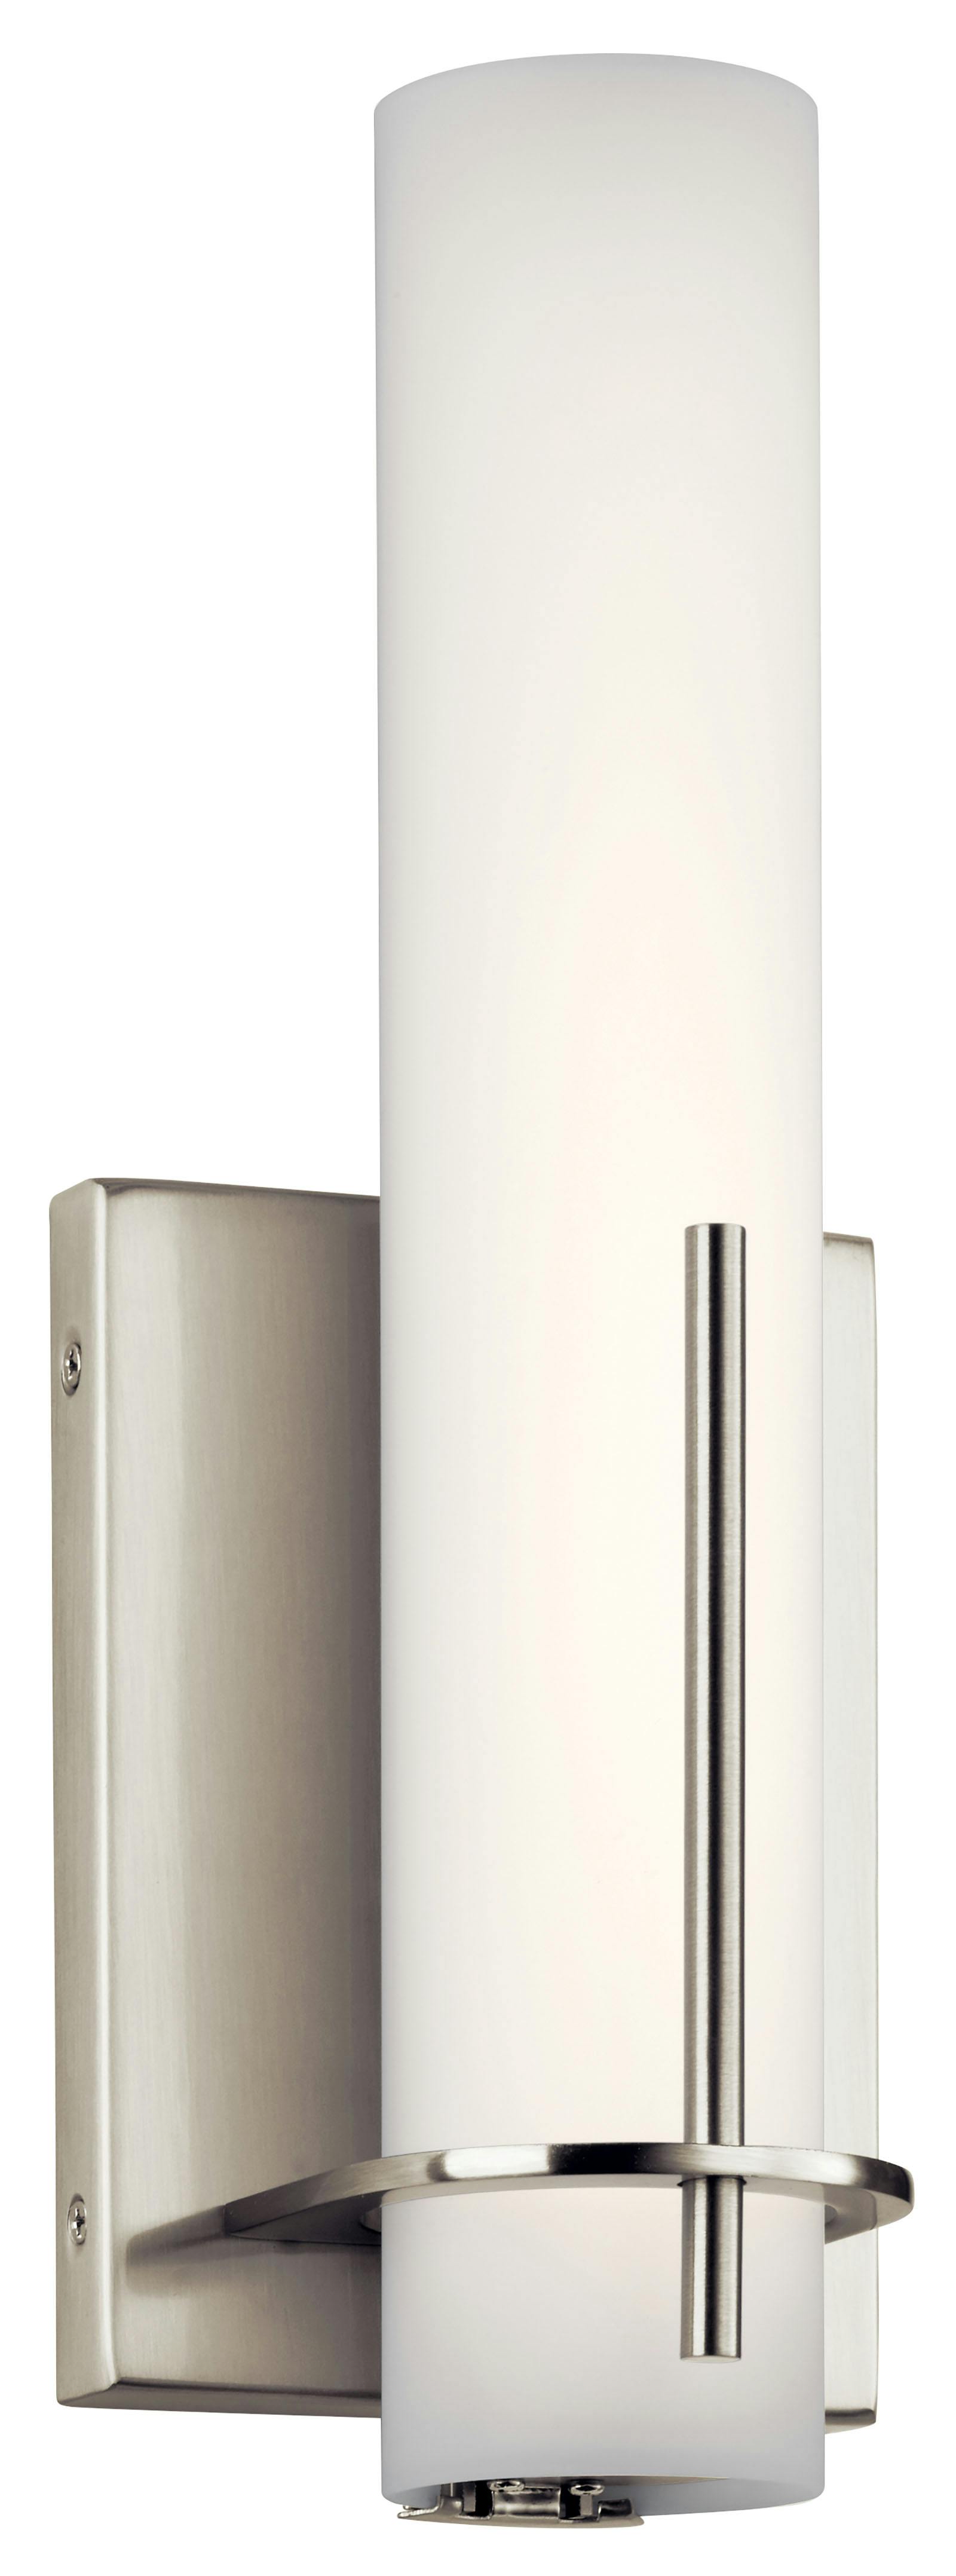 Traverso™ LED Wall Sconce Brushed Nickel on a white background